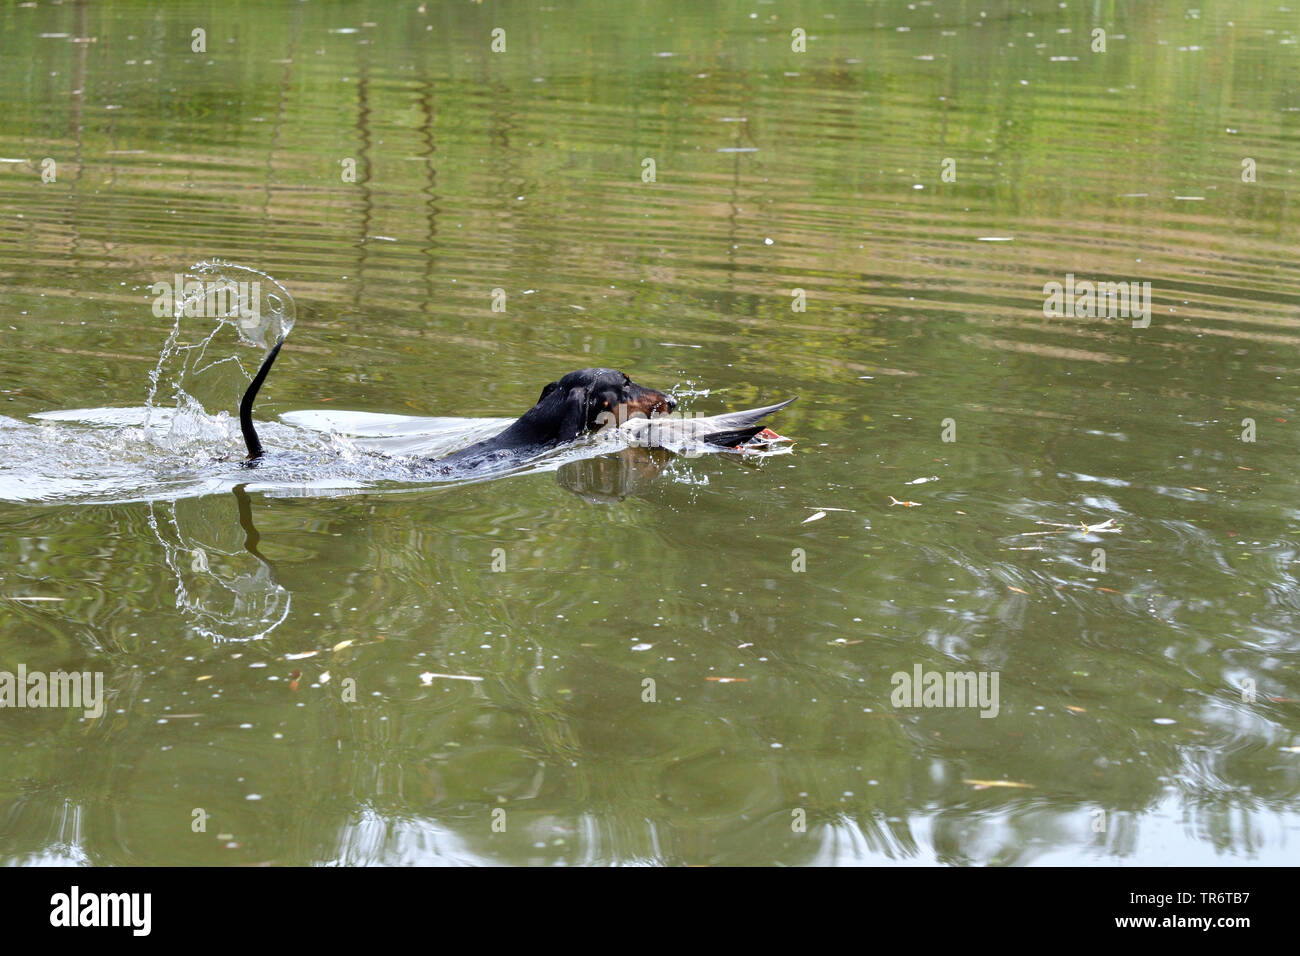 Short-haired Dachshund, Short-haired sausage dog, domestic dog (Canis lupus f. familiaris), swimming and retrieving a duck, Germany Stock Photo